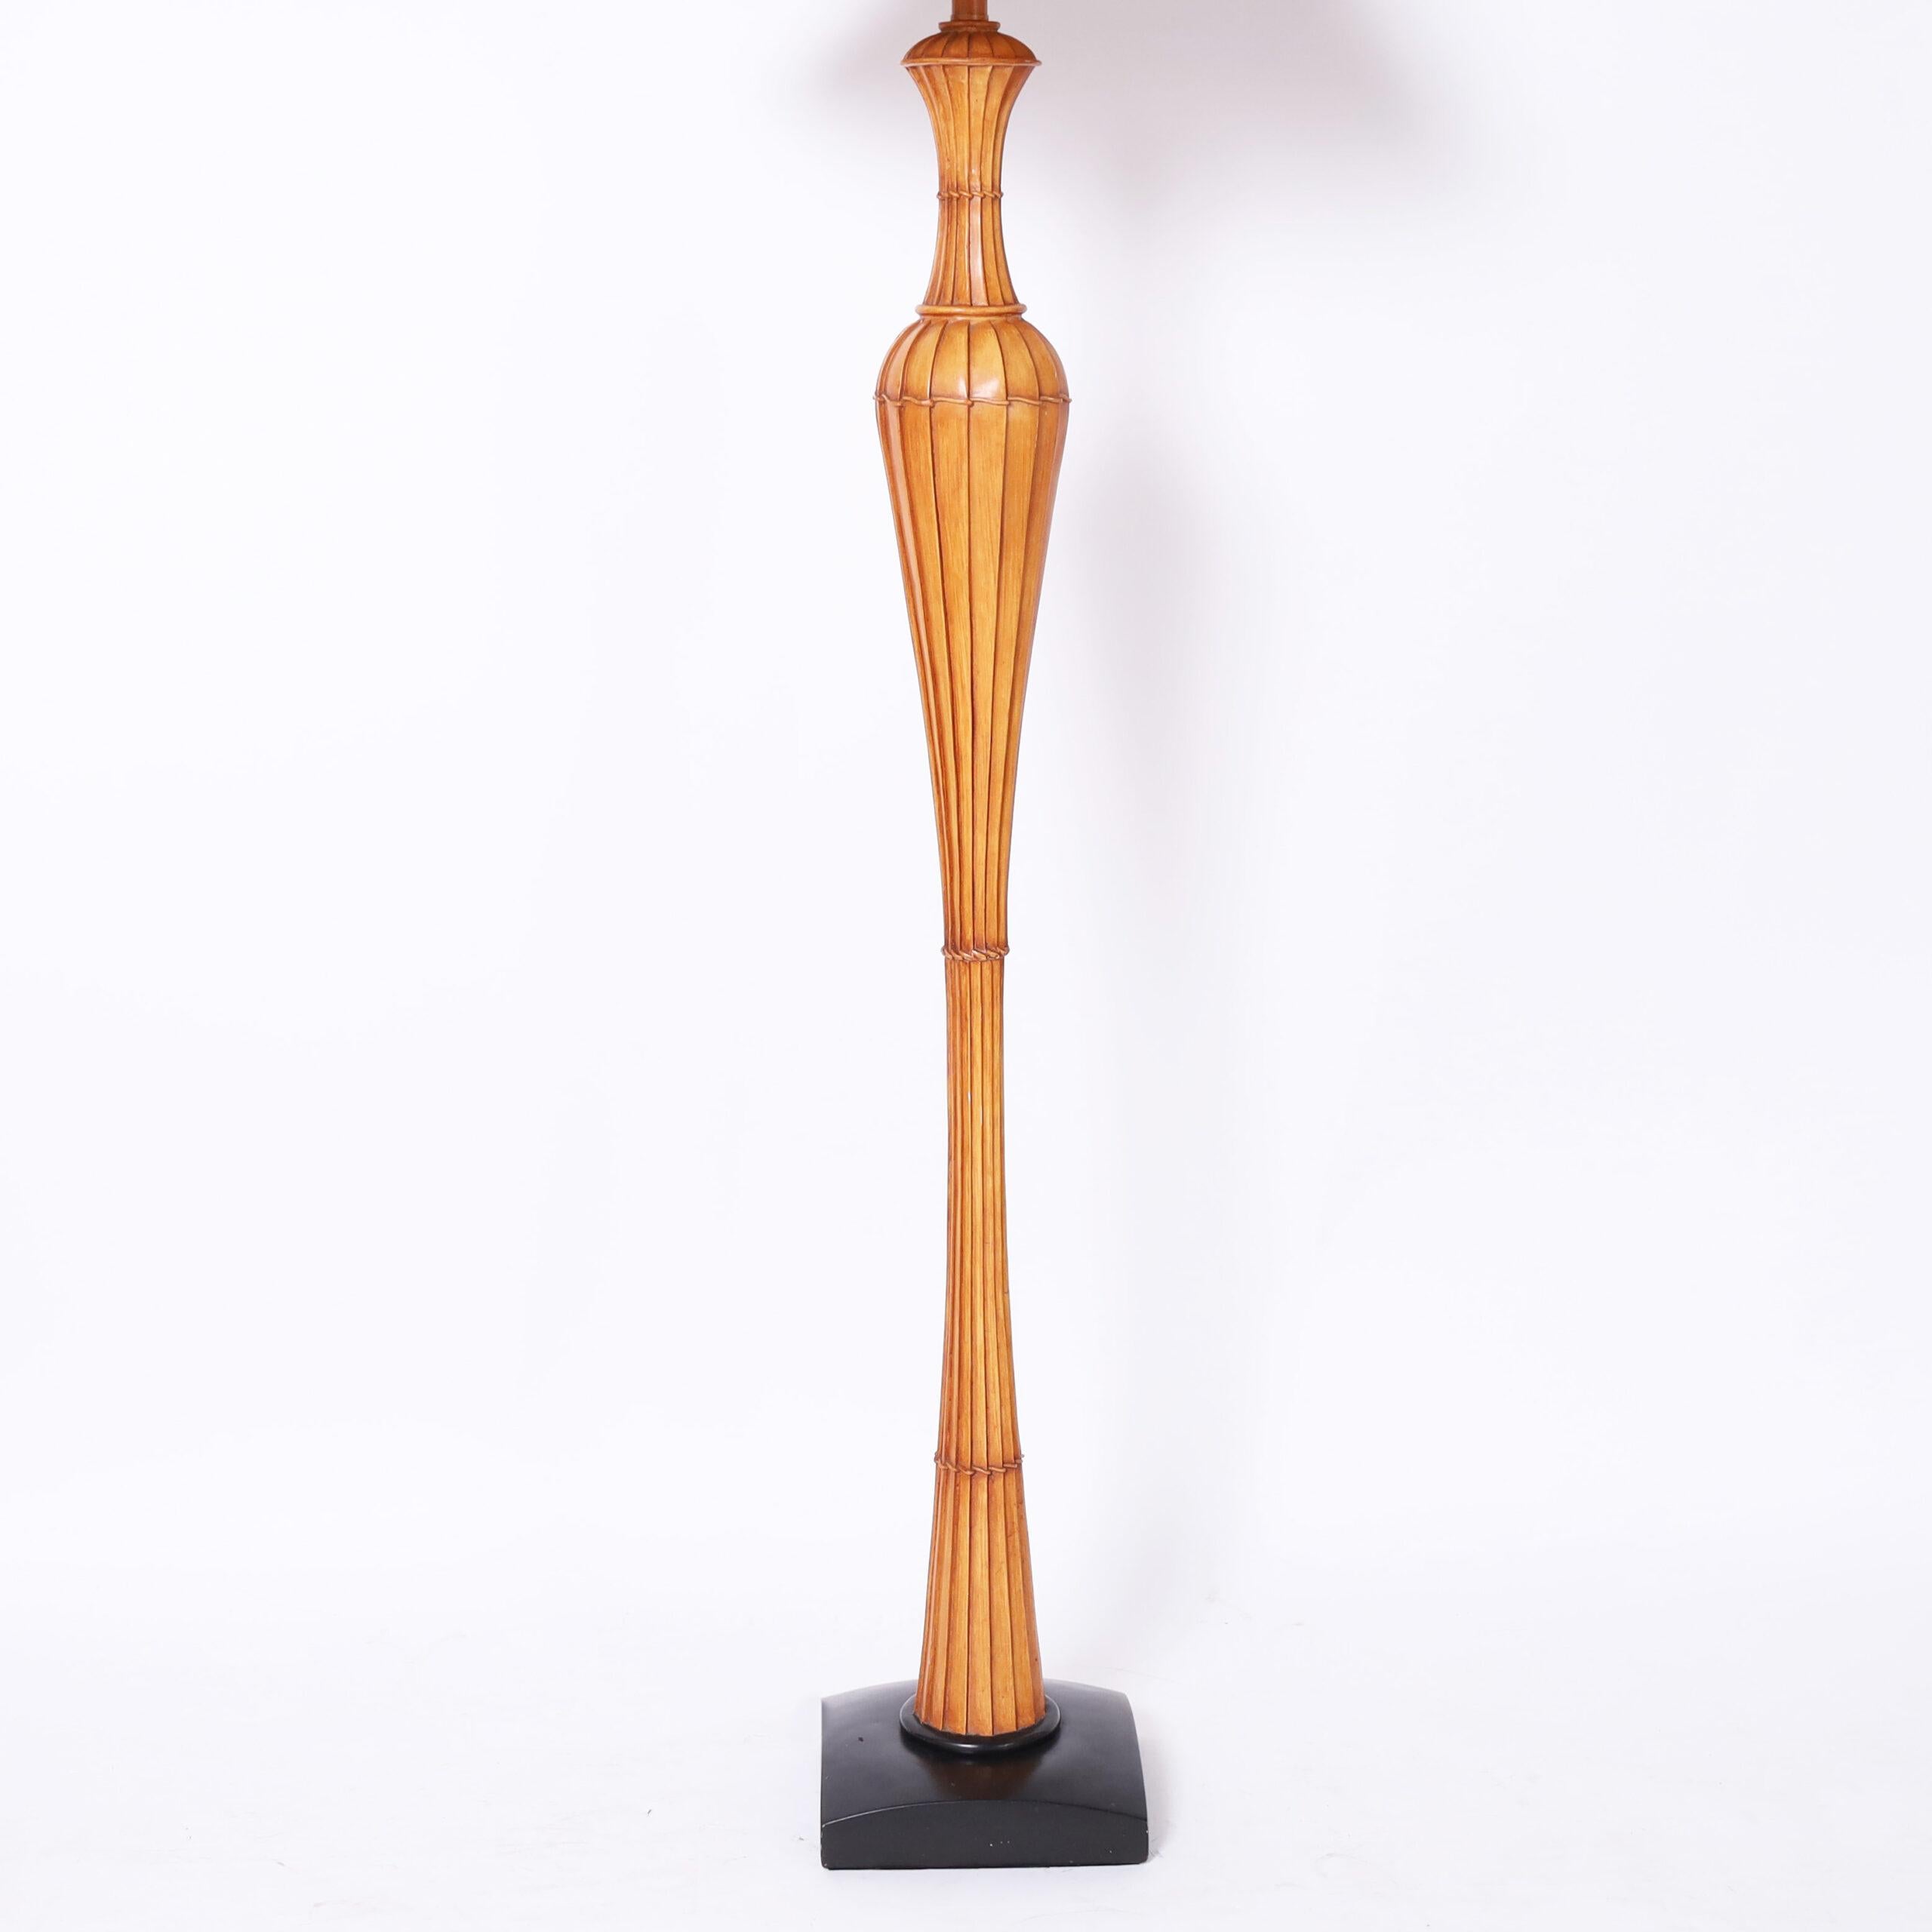 Chic mid century floor lamp with a bamboo shade and faux bamboo composition column on a black lacquer base.